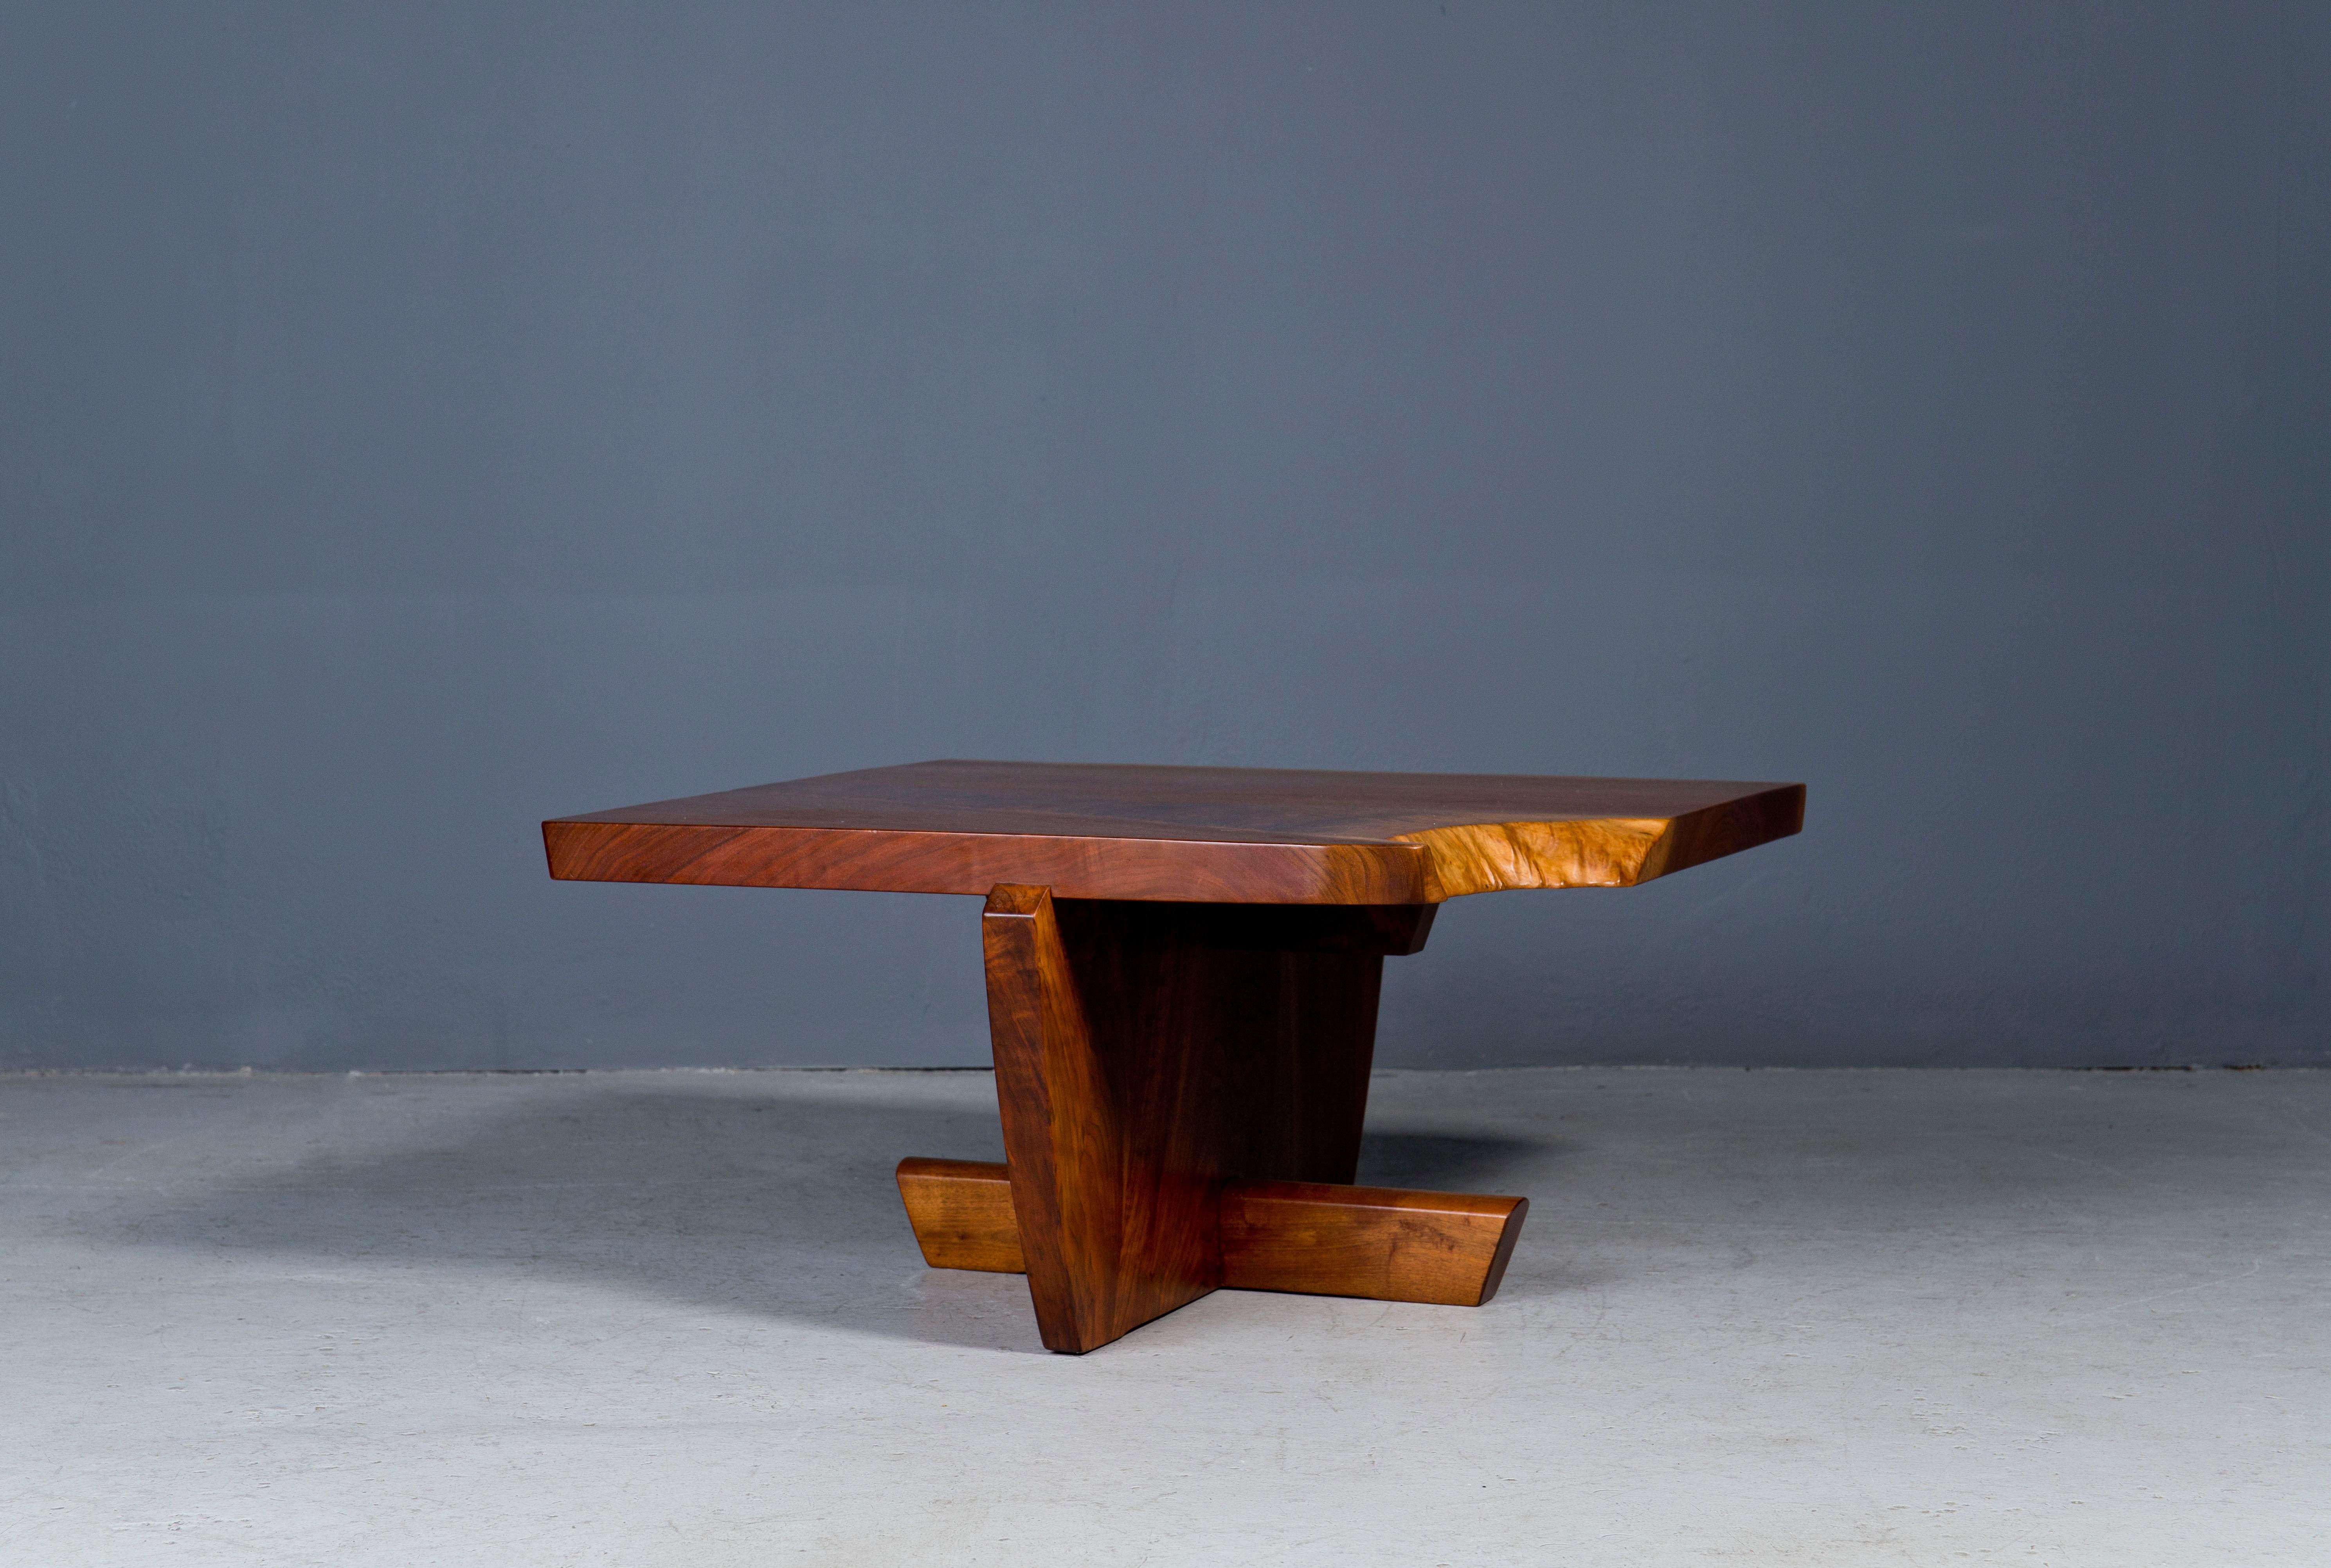 Unique George Nakashima Greenrock coffee table with an expressive grain, single board top, and architectural base.